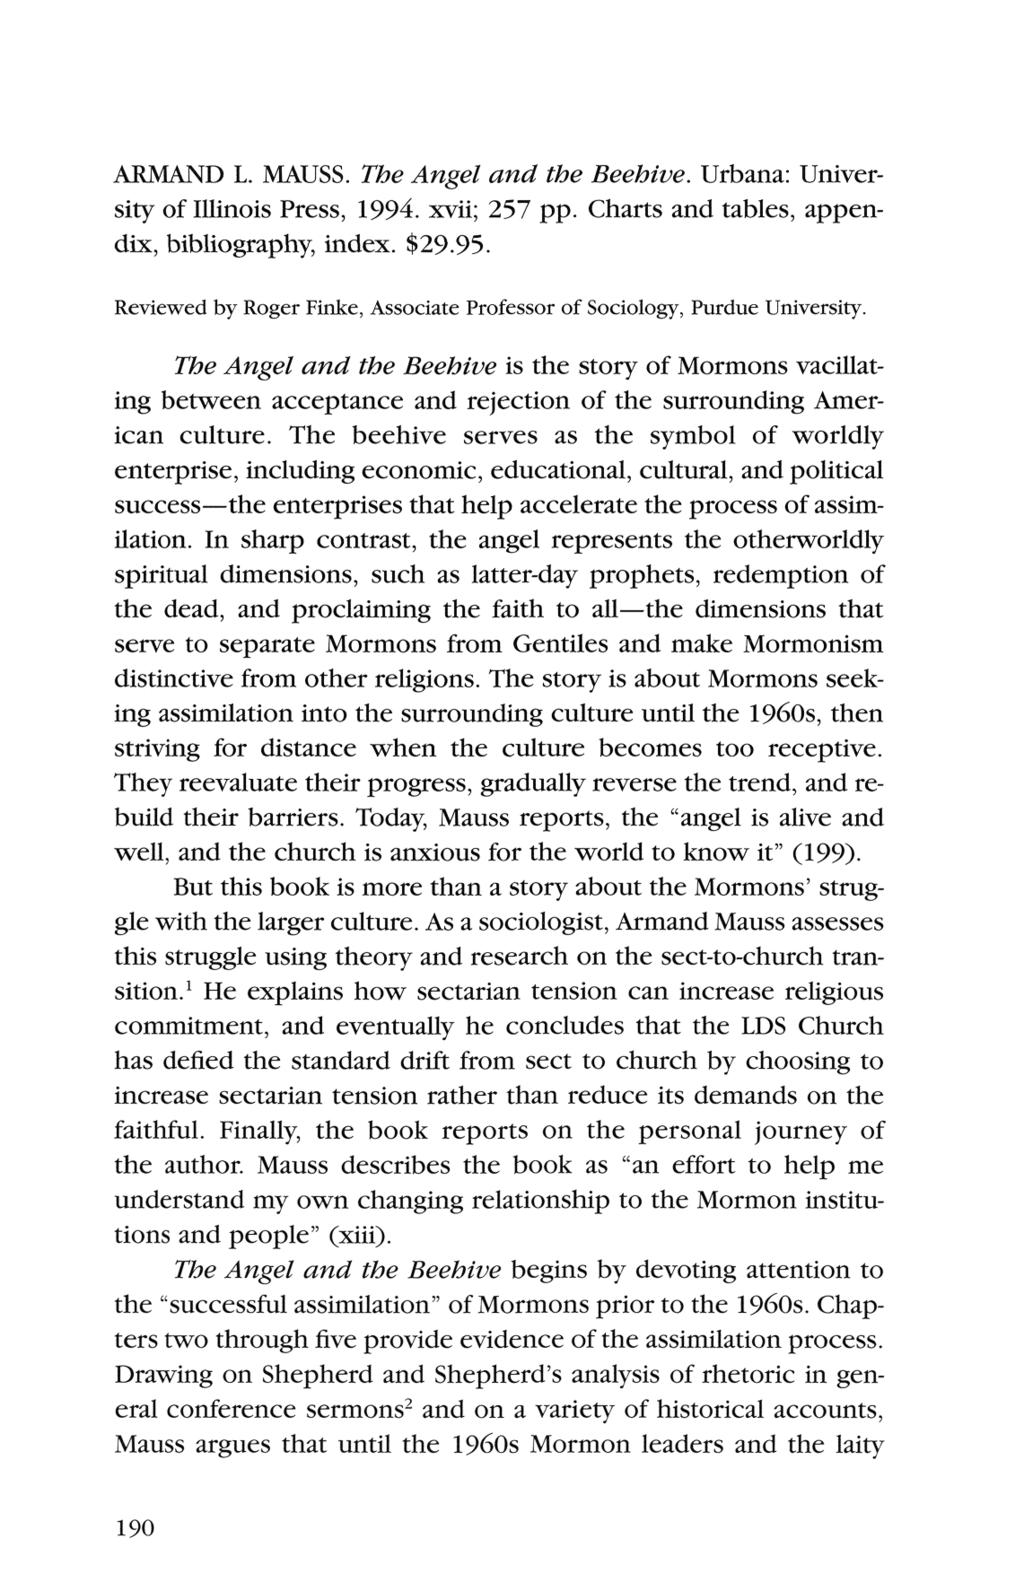 Finke: <em>the Angel and the Beehive</em> by Armand L. Mauss ARMAND L MAUSS the angel and the beehive urbana university of illinois press 1994 xvii 257 pp dix bibliography index 2995 29.